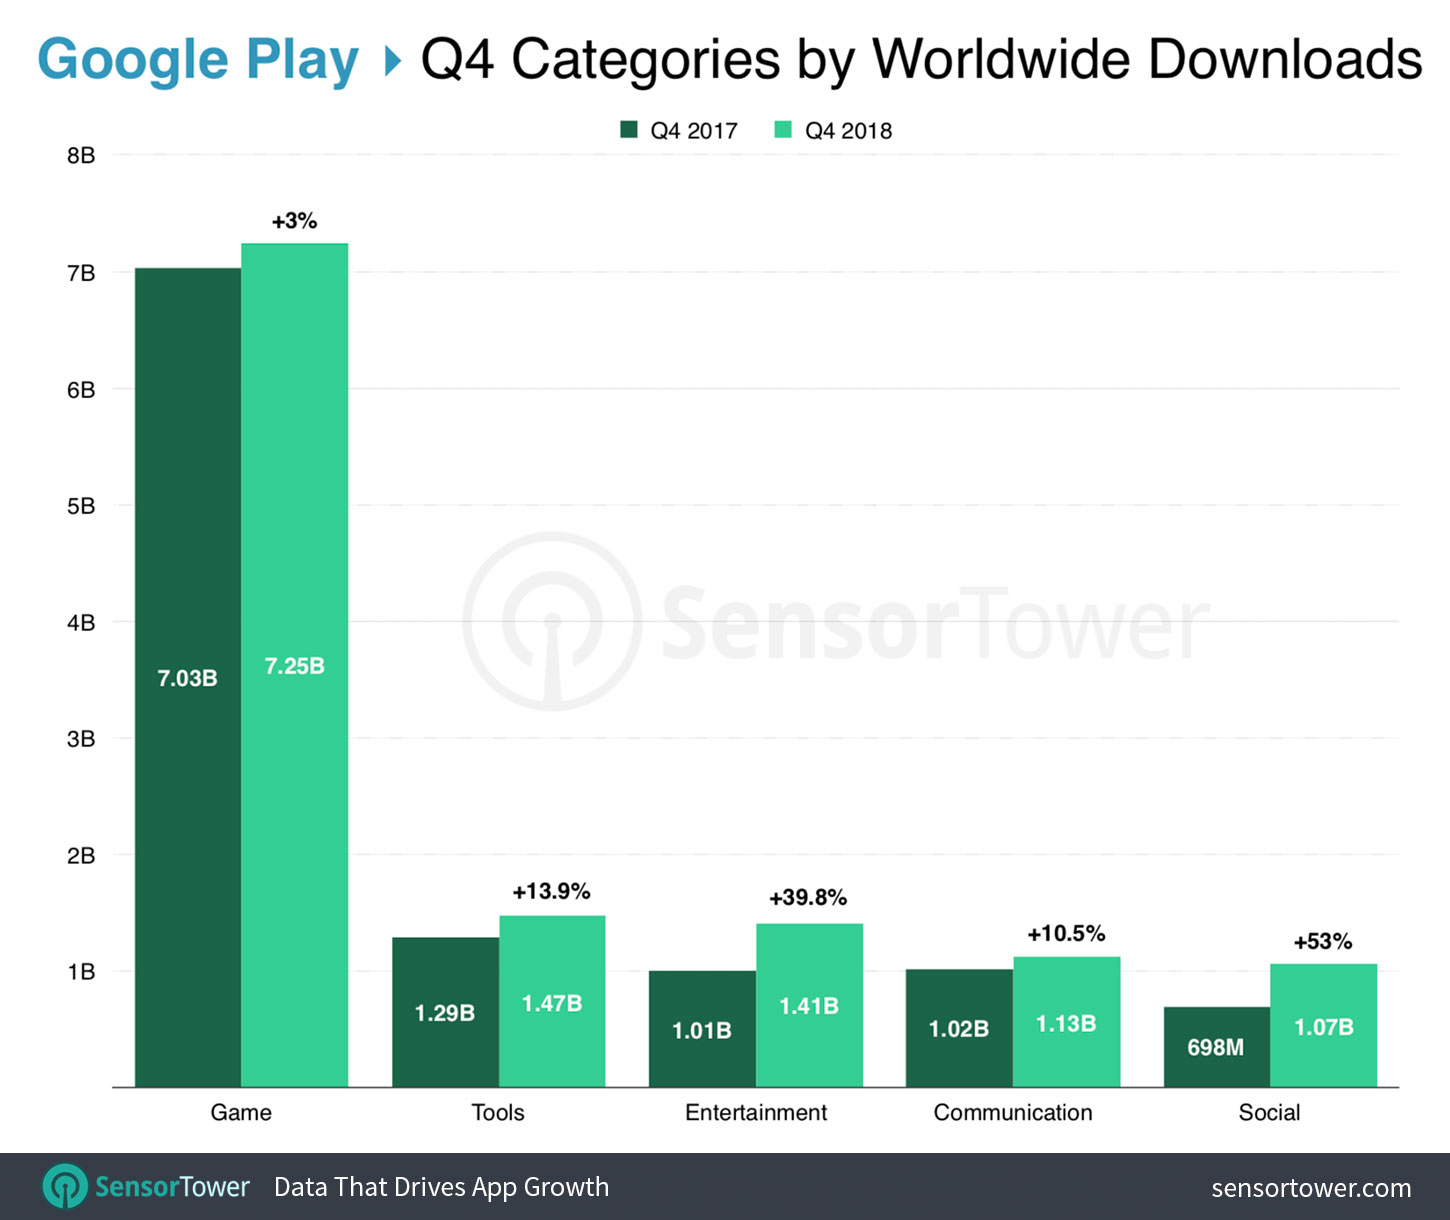 Top Google Play Categories Worldwide for Q4 2018